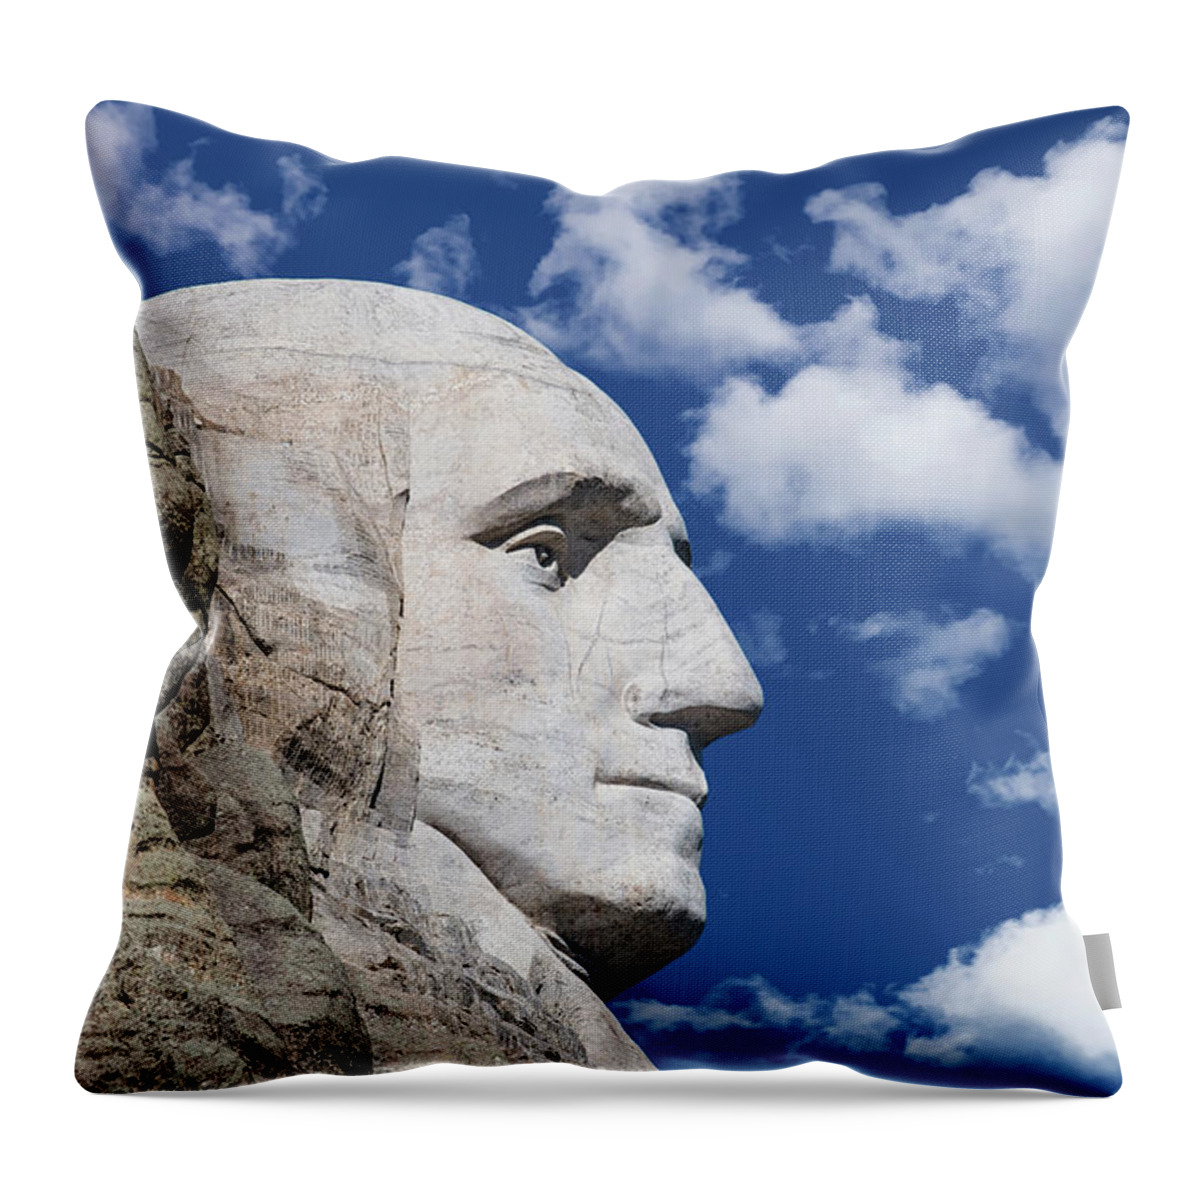 Black Hills Throw Pillow featuring the photograph Mount Rushmore Profile of George Washington by Tom Mc Nemar